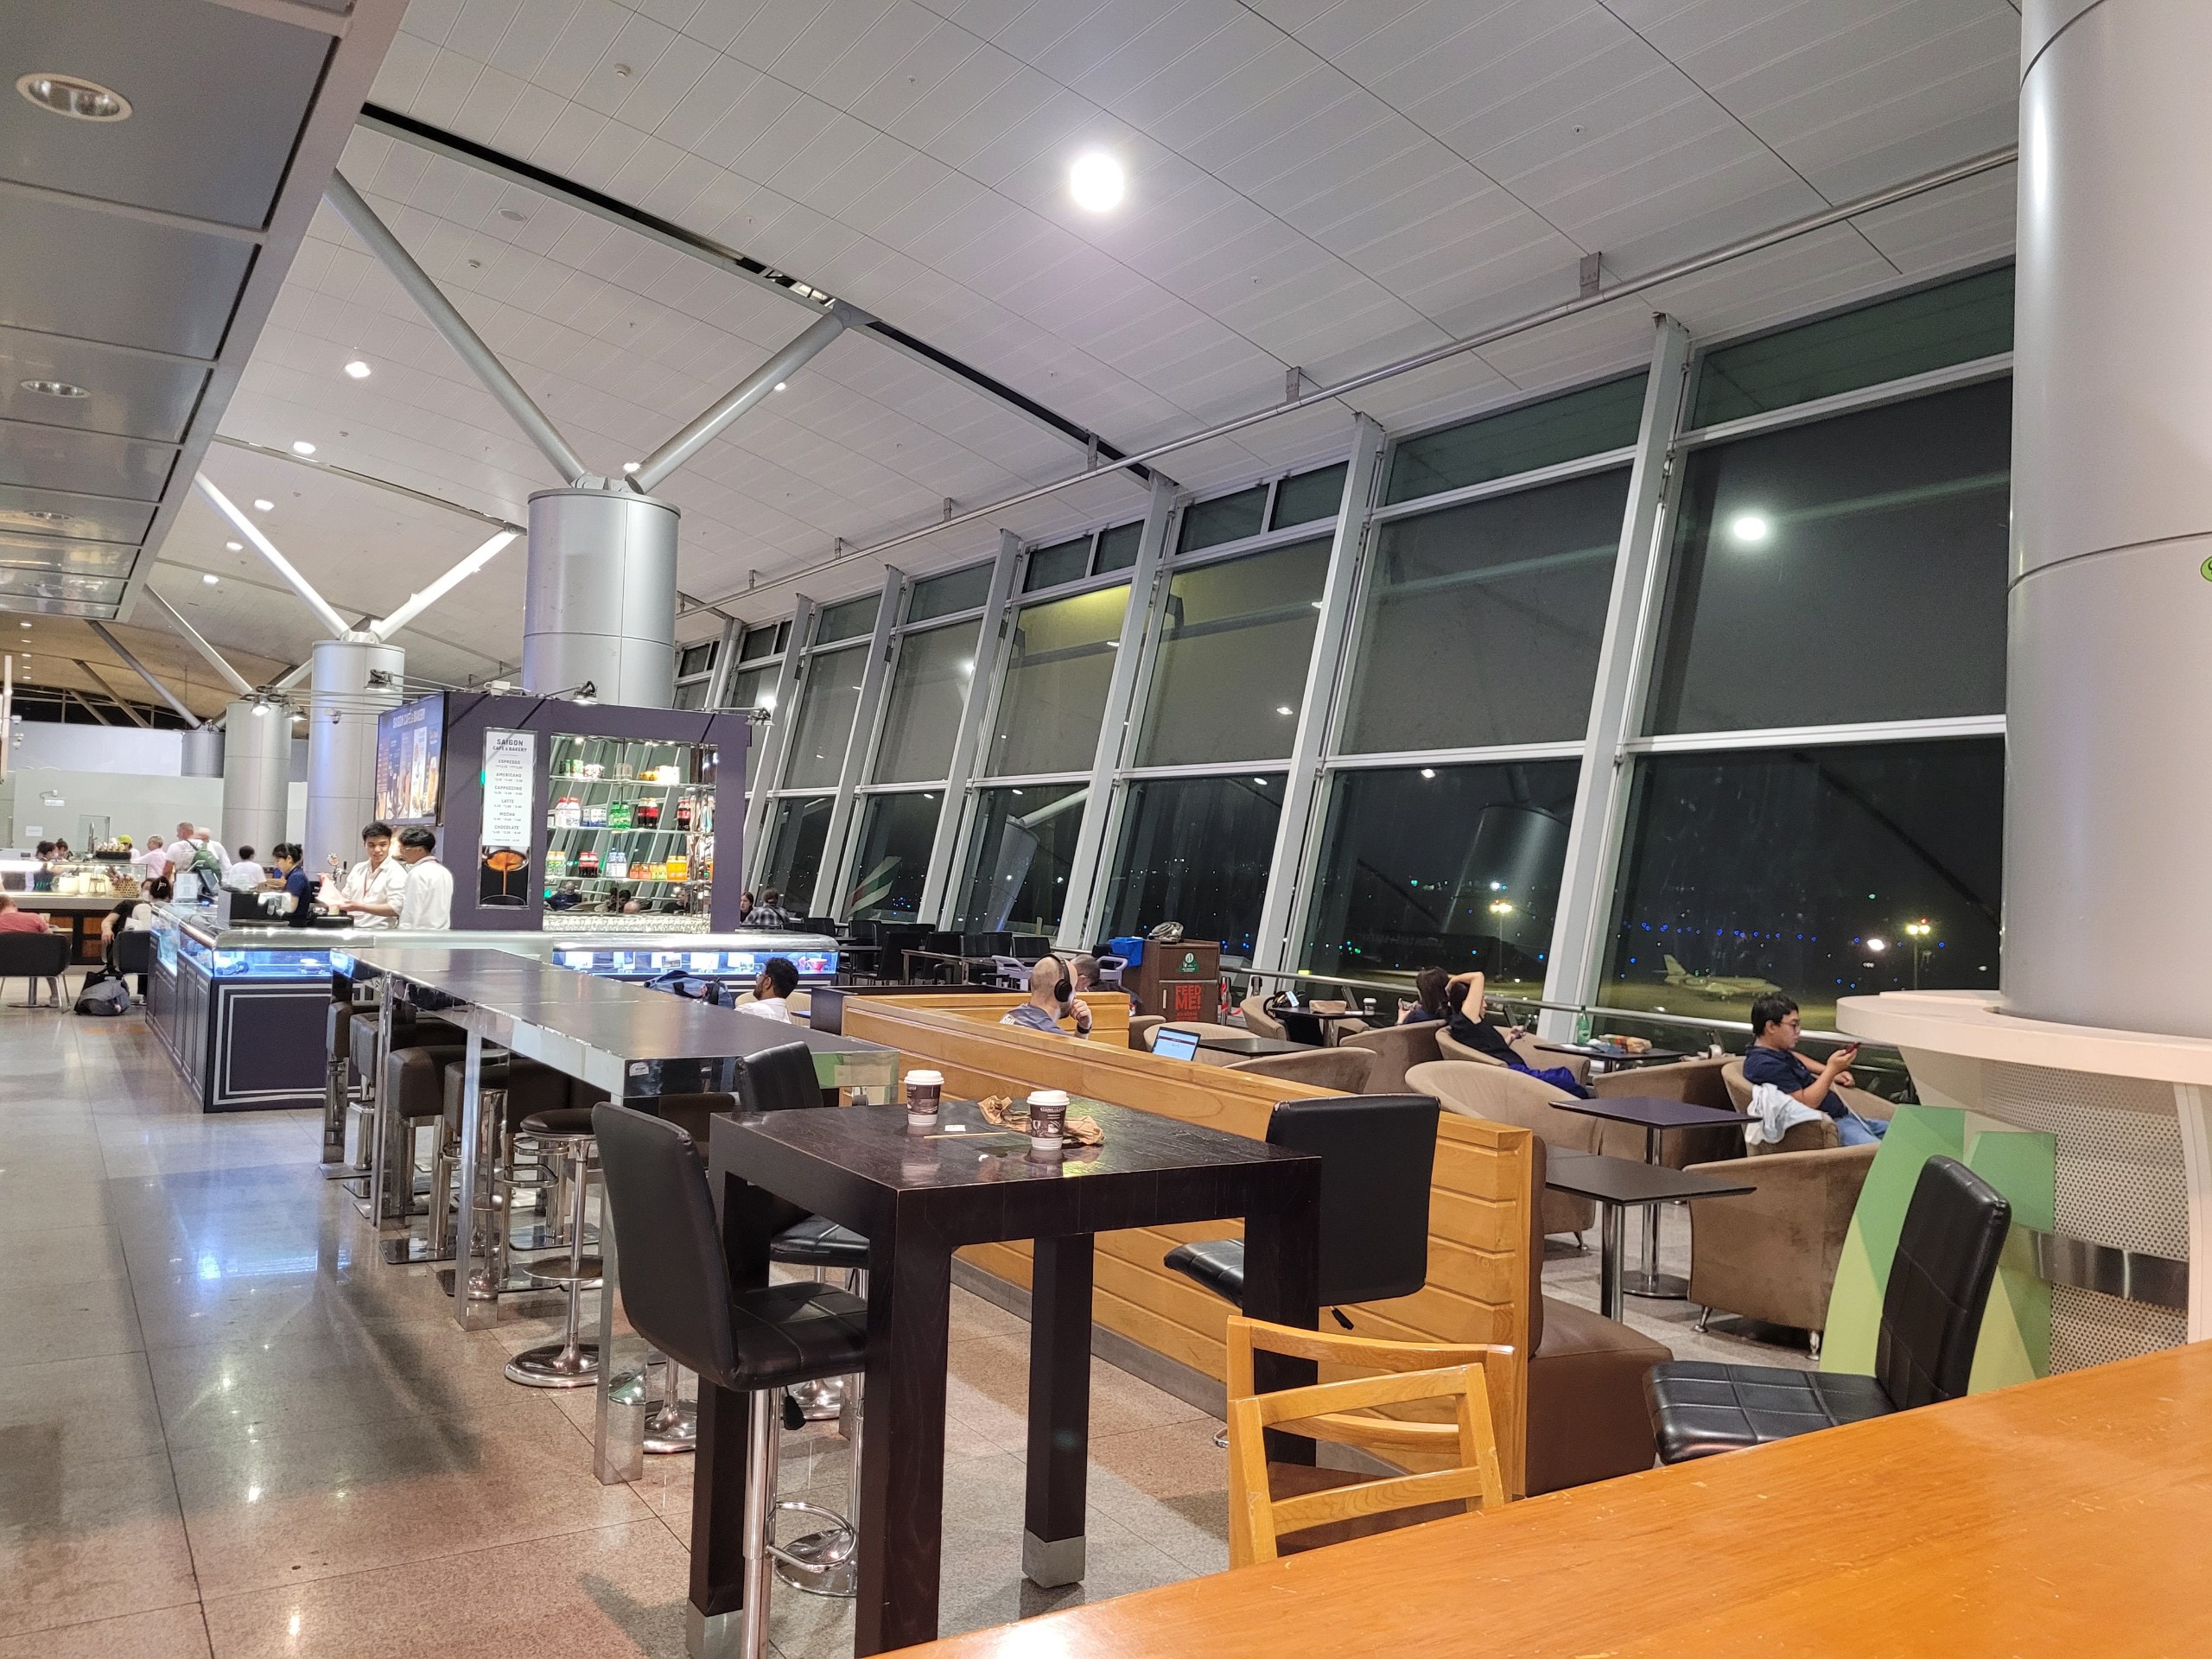 A dining area at the departure terminal in Tan Son Nhat International Airport Ho Chi Minh City, Vietnam. Photo: Ray Kuschert / Tuoi Tre News